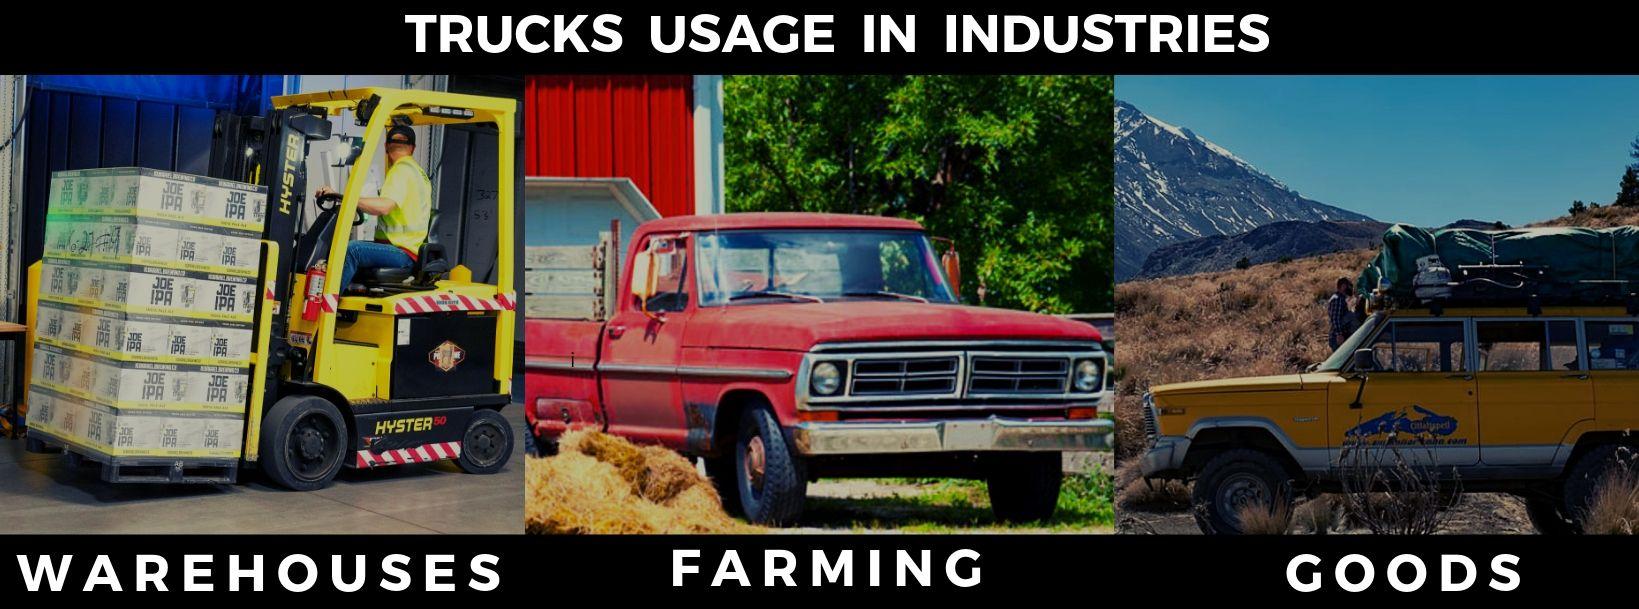 Usage Of Trucks In Different Industries